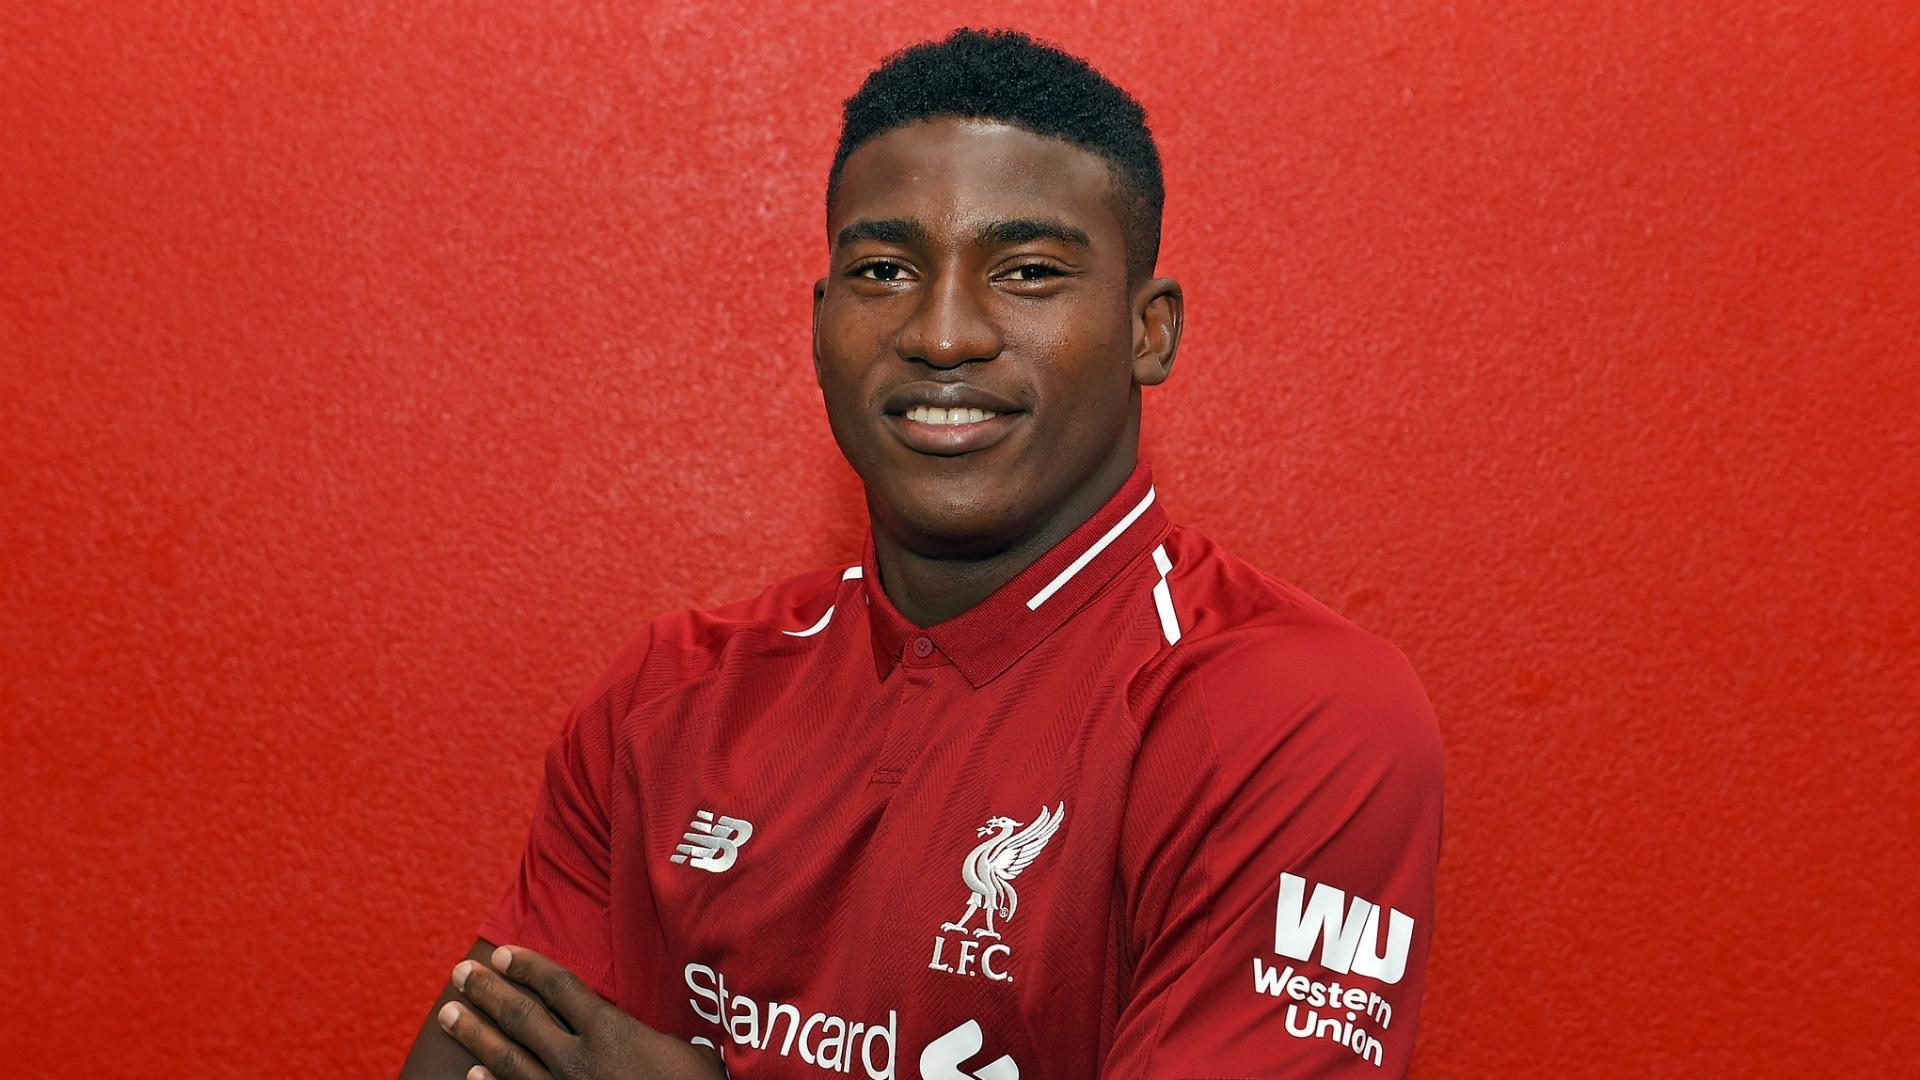 England’s Nottingham Forest has agreed on a club-record price for a Nigerian striker, signing Taiwo Awoniyi from Union Berlin.